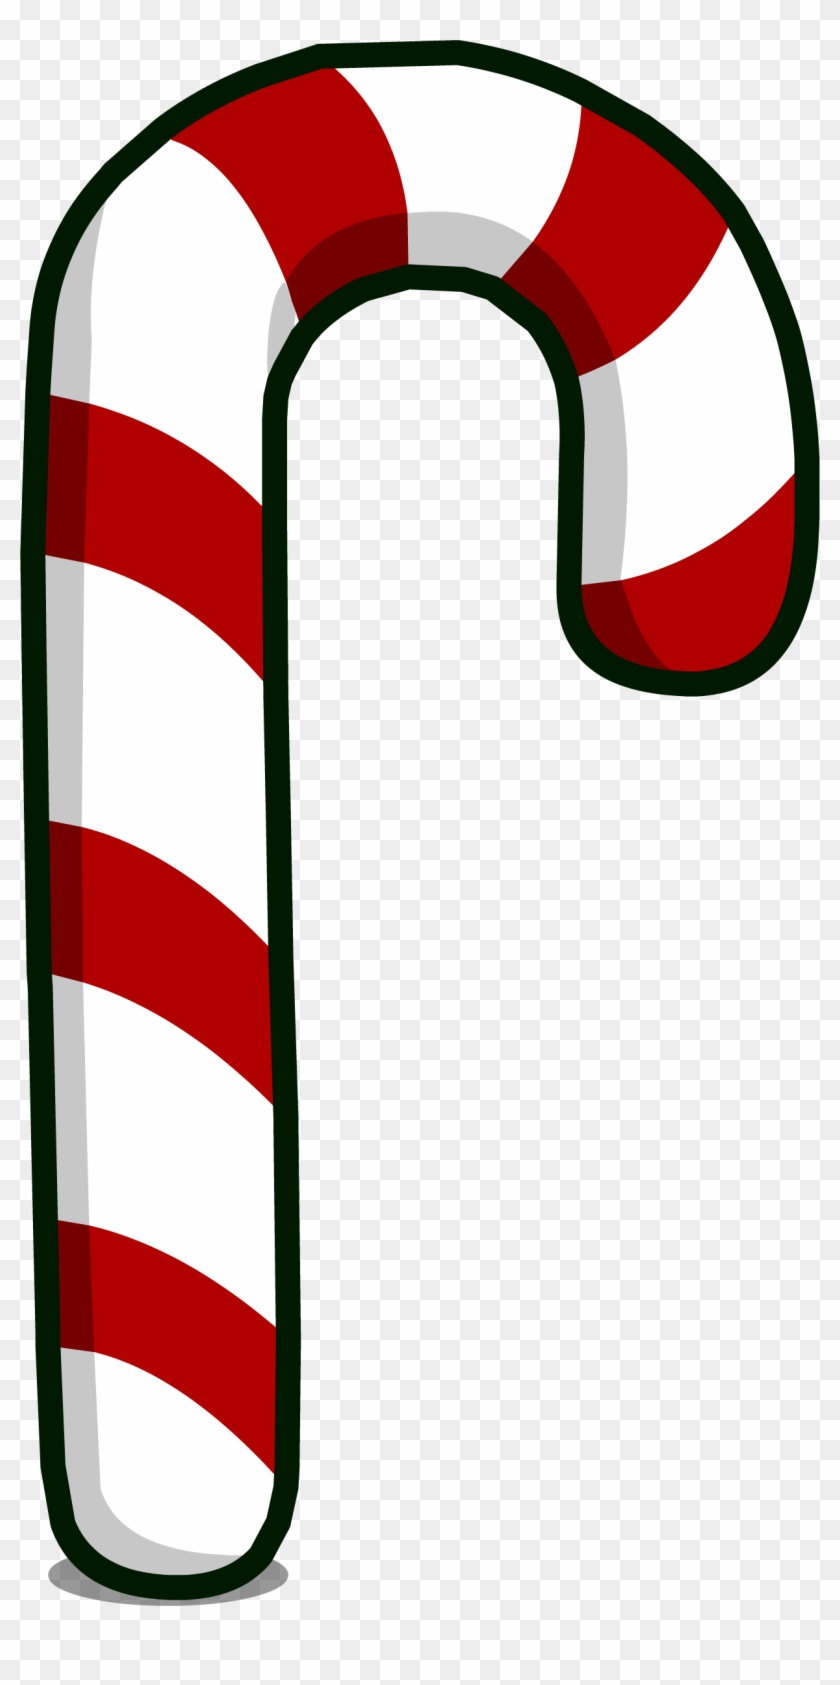 Giant Candy Cane R - Candy Cane #929138